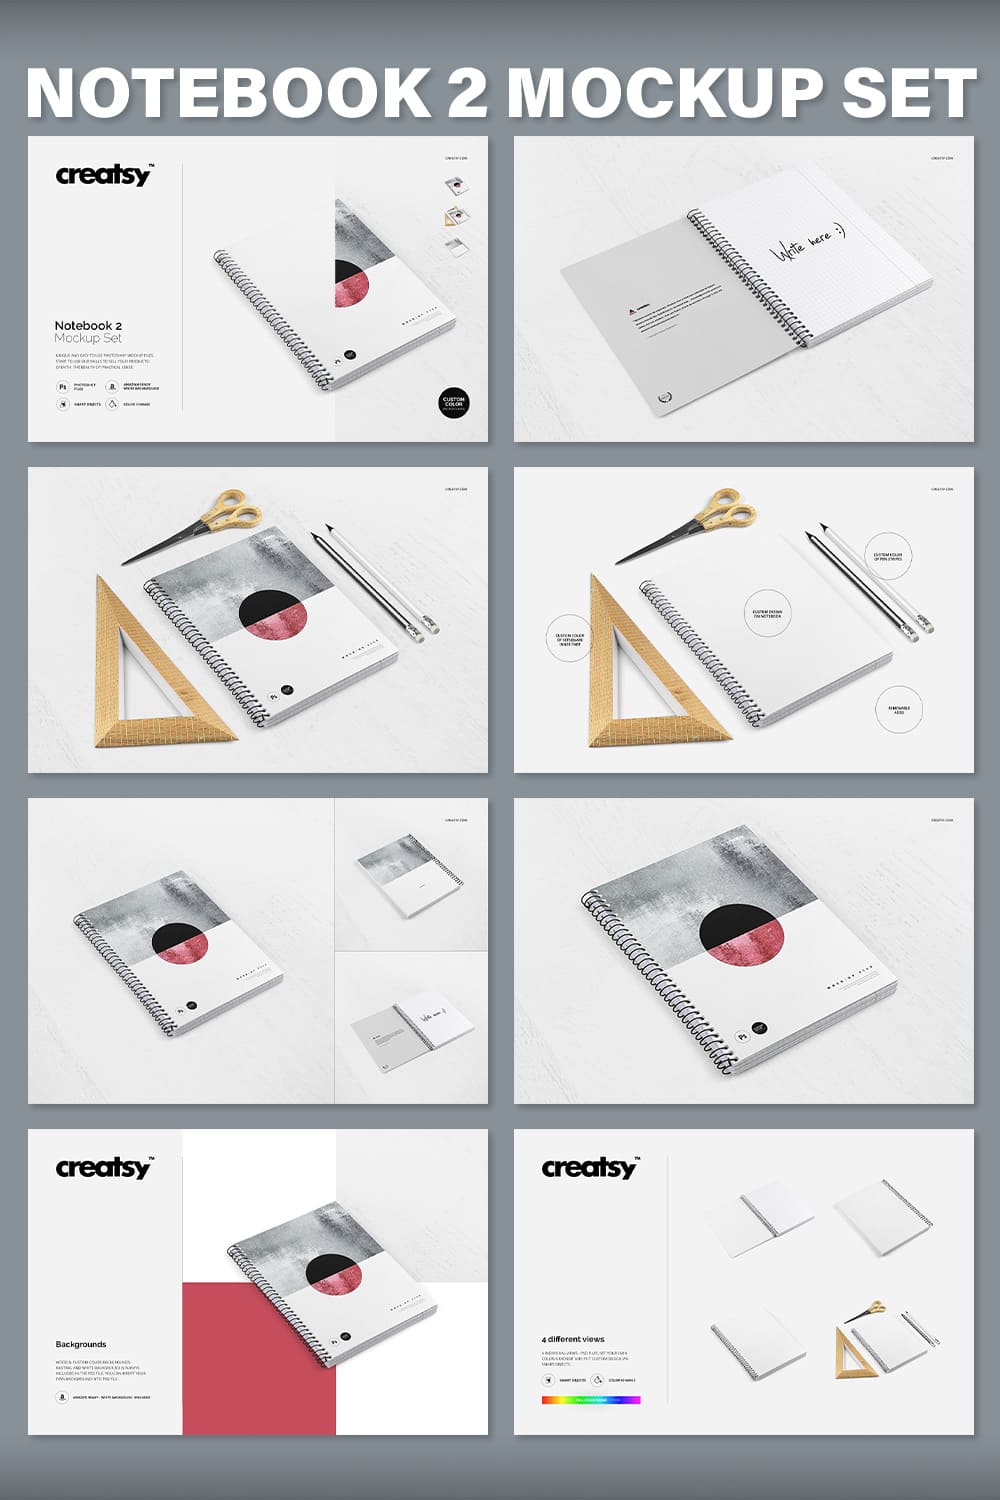 A set of notebook images with great designs.